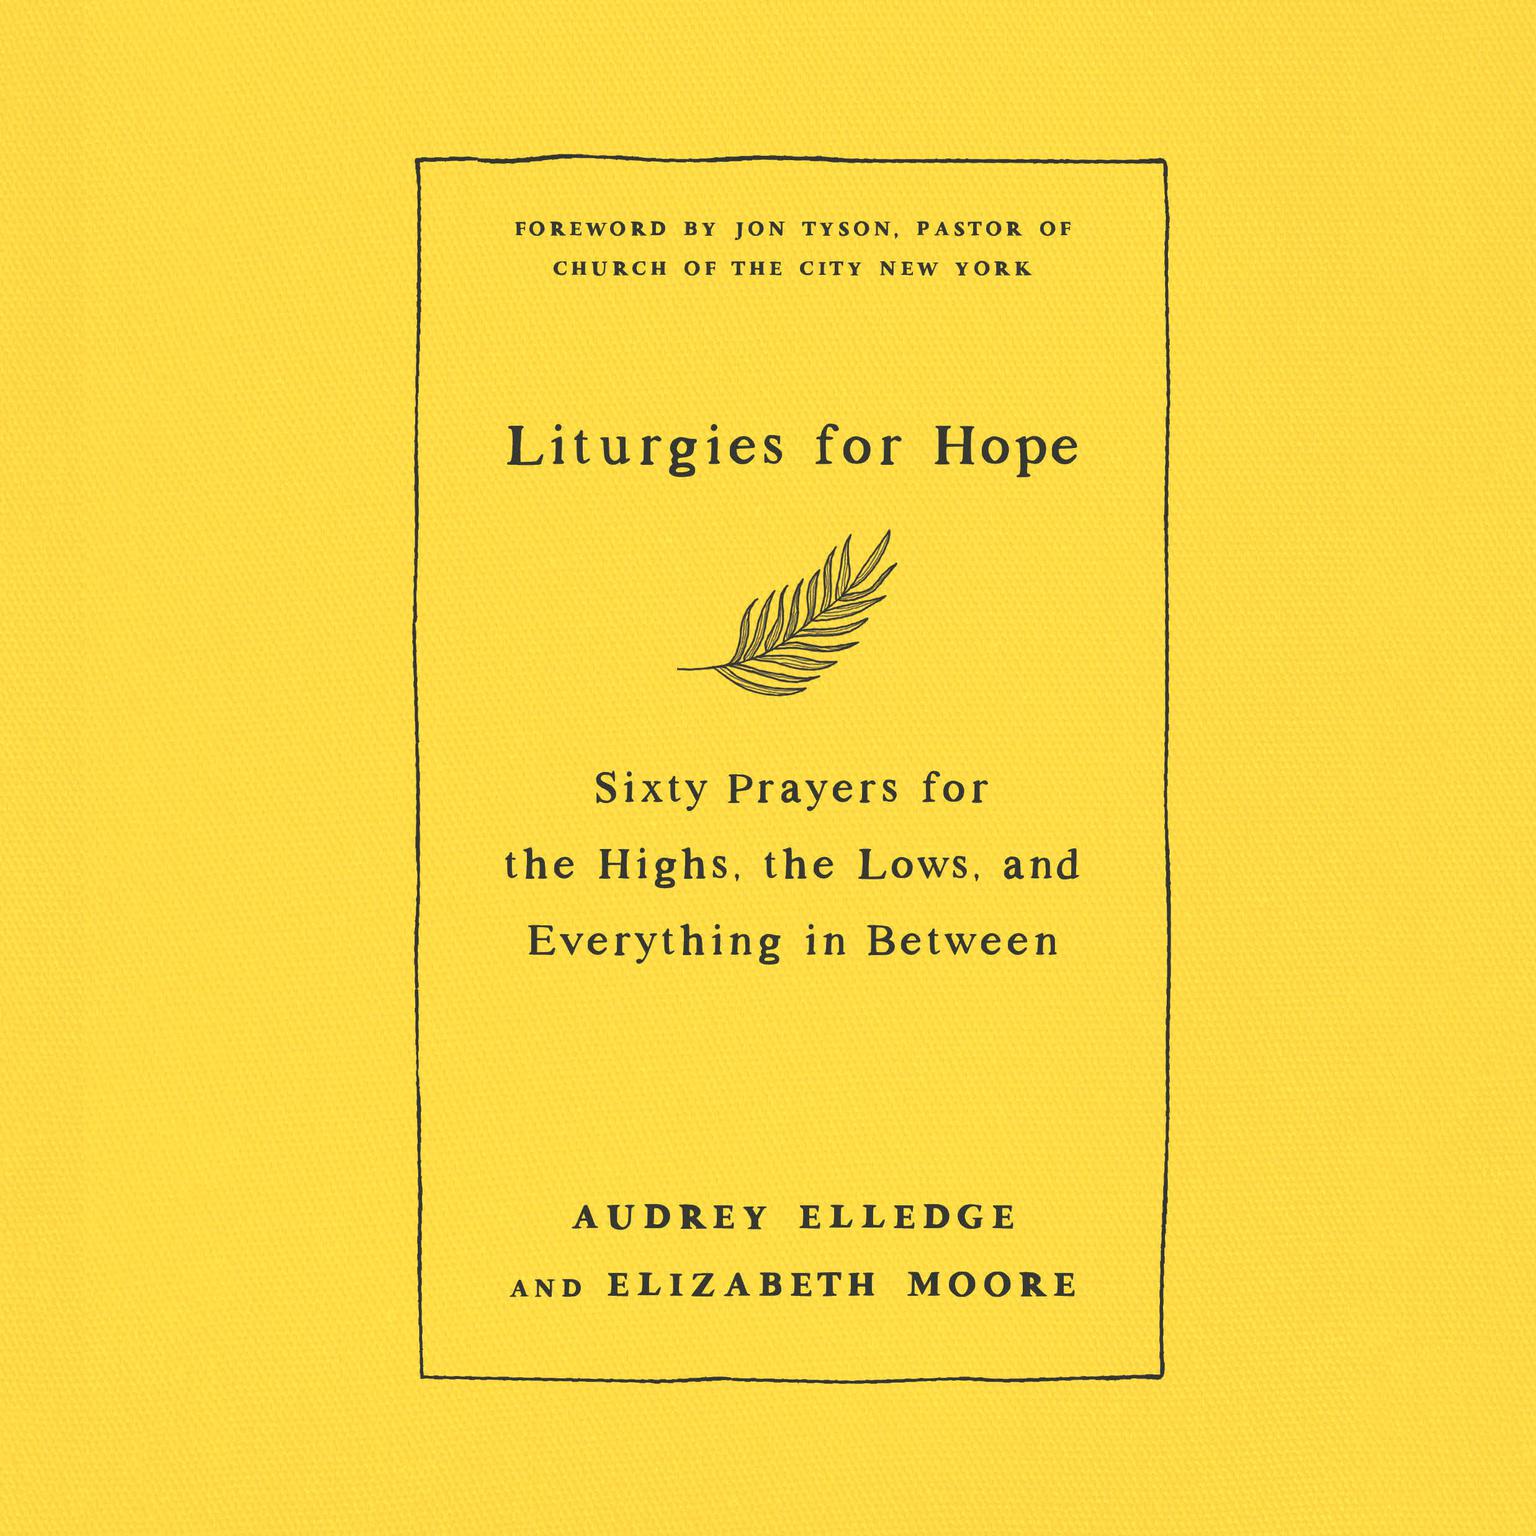 Liturgies for Hope: Sixty Prayers for the Highs, the Lows, and Everything in Between Audiobook, by Audrey Elledge